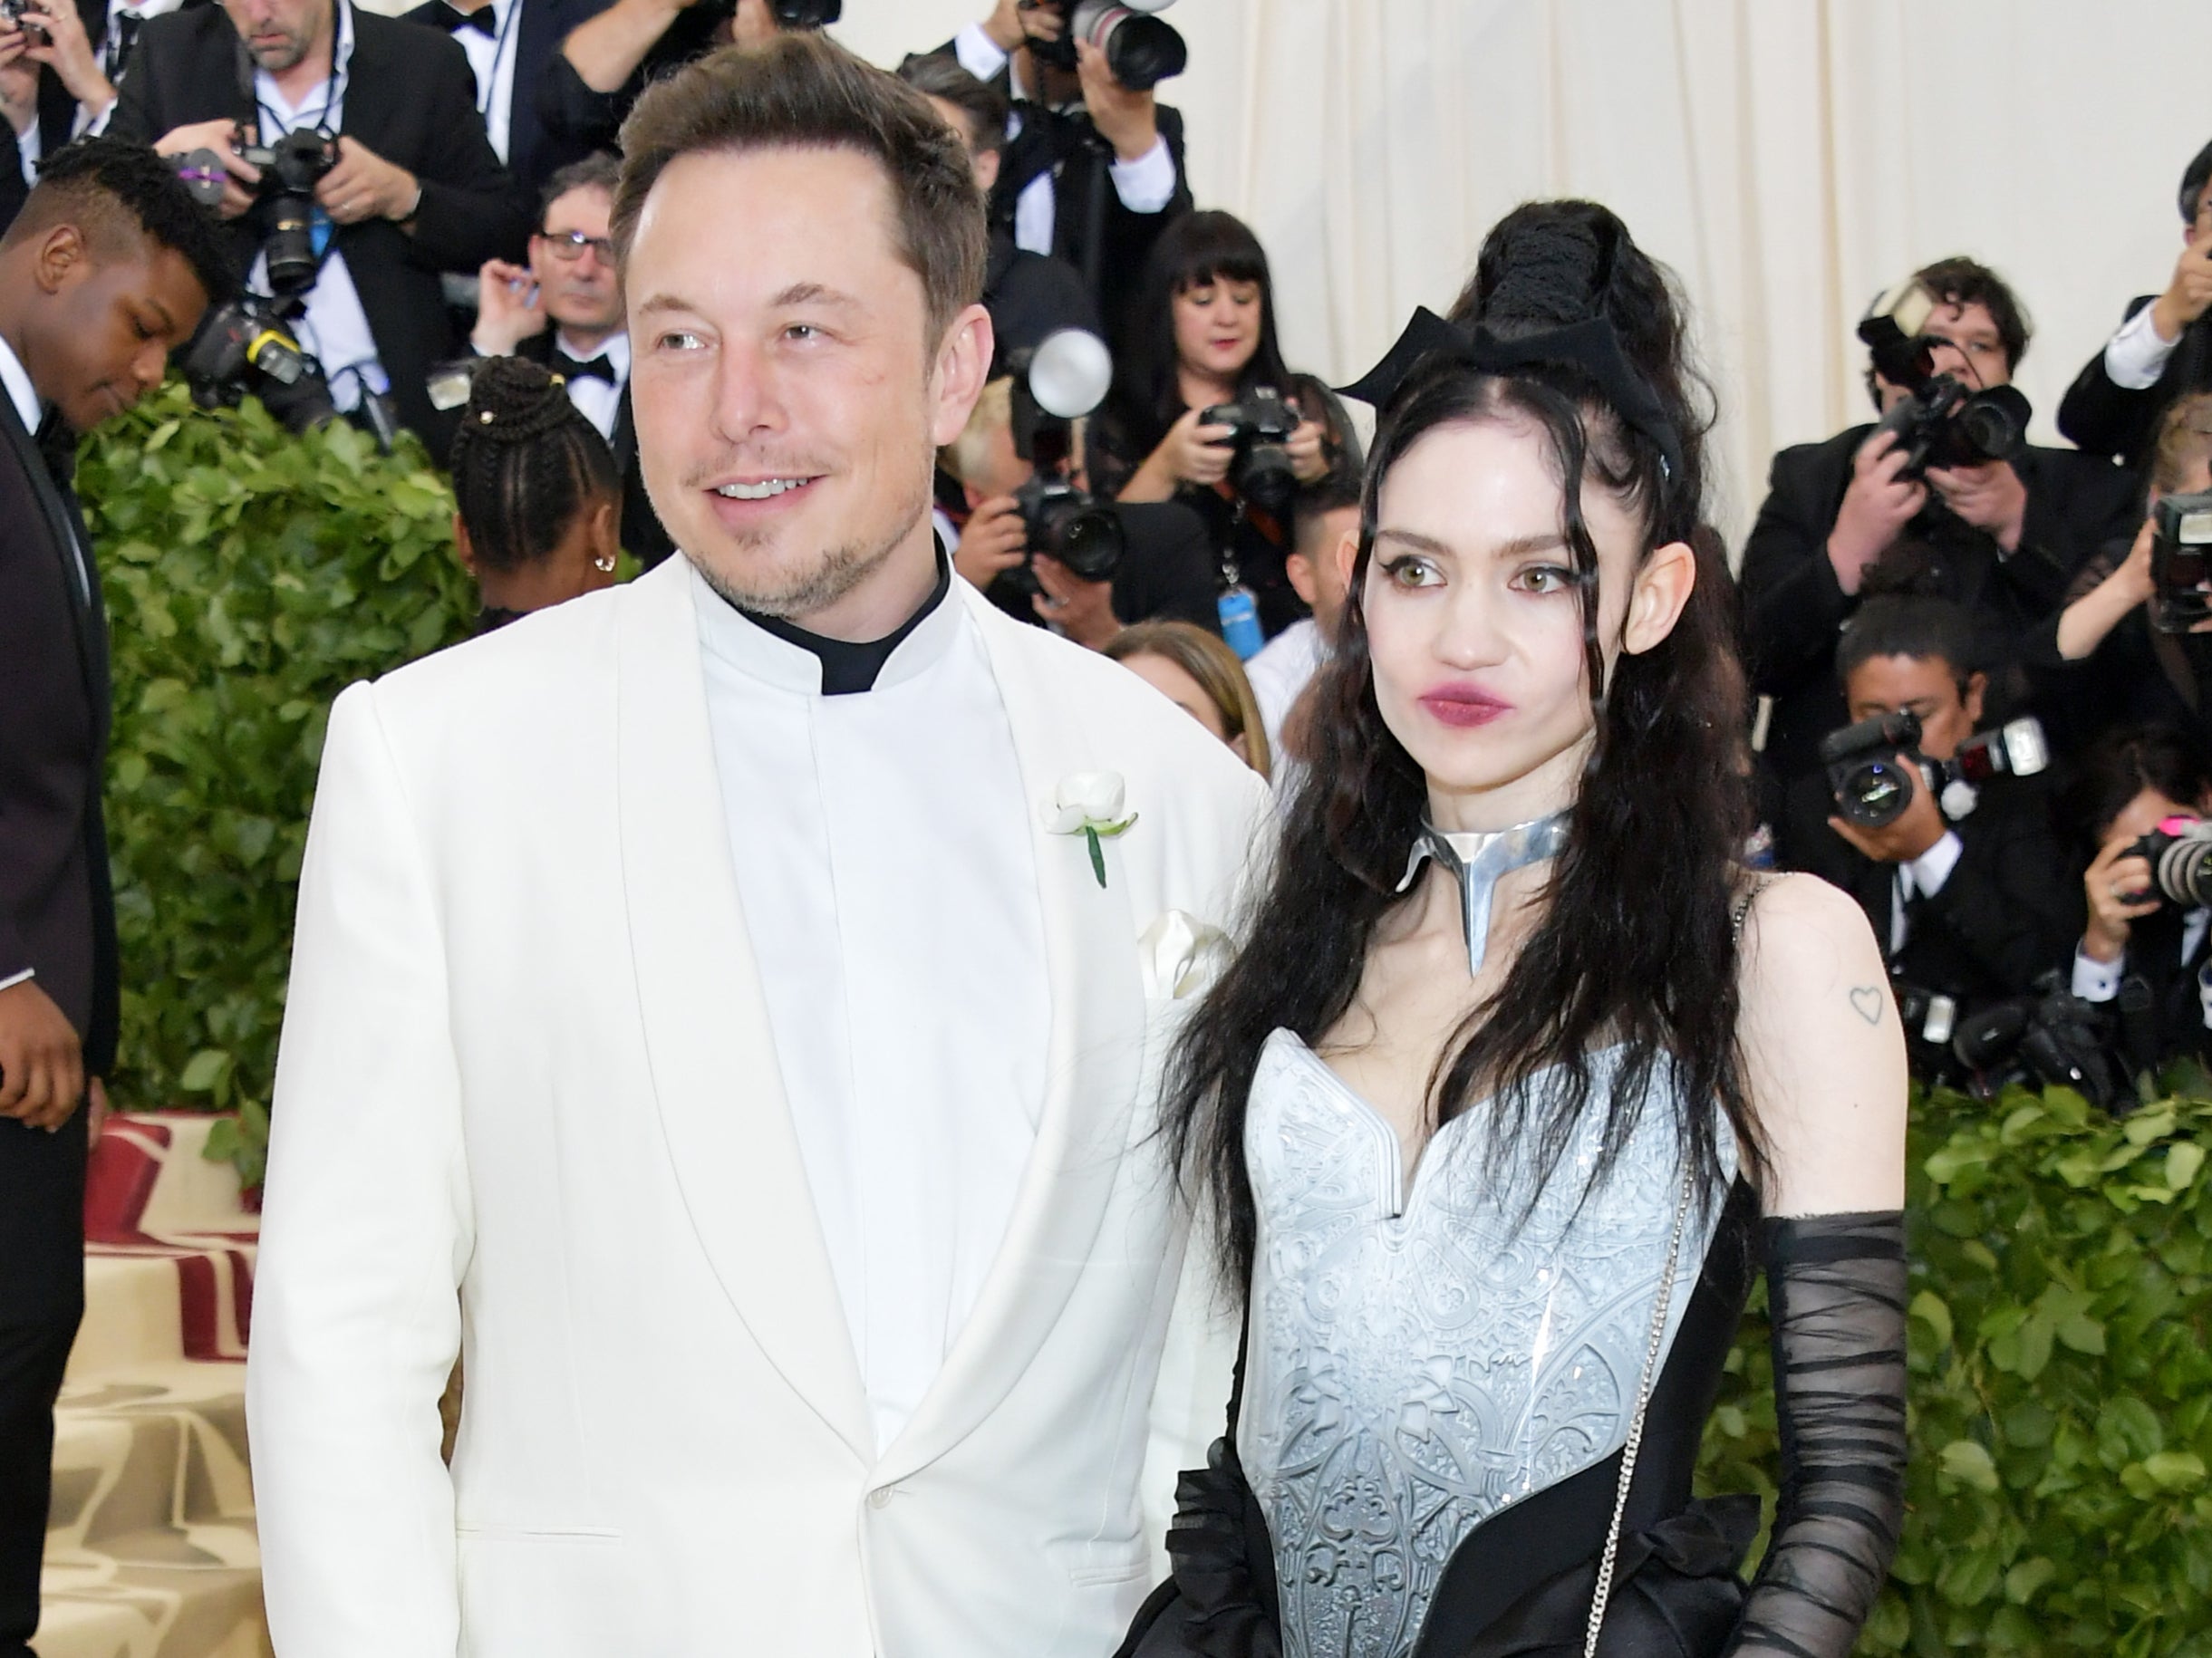 Elon Musk and Grimes debuted as a couple on the red carpet at the 2018 Met Gala